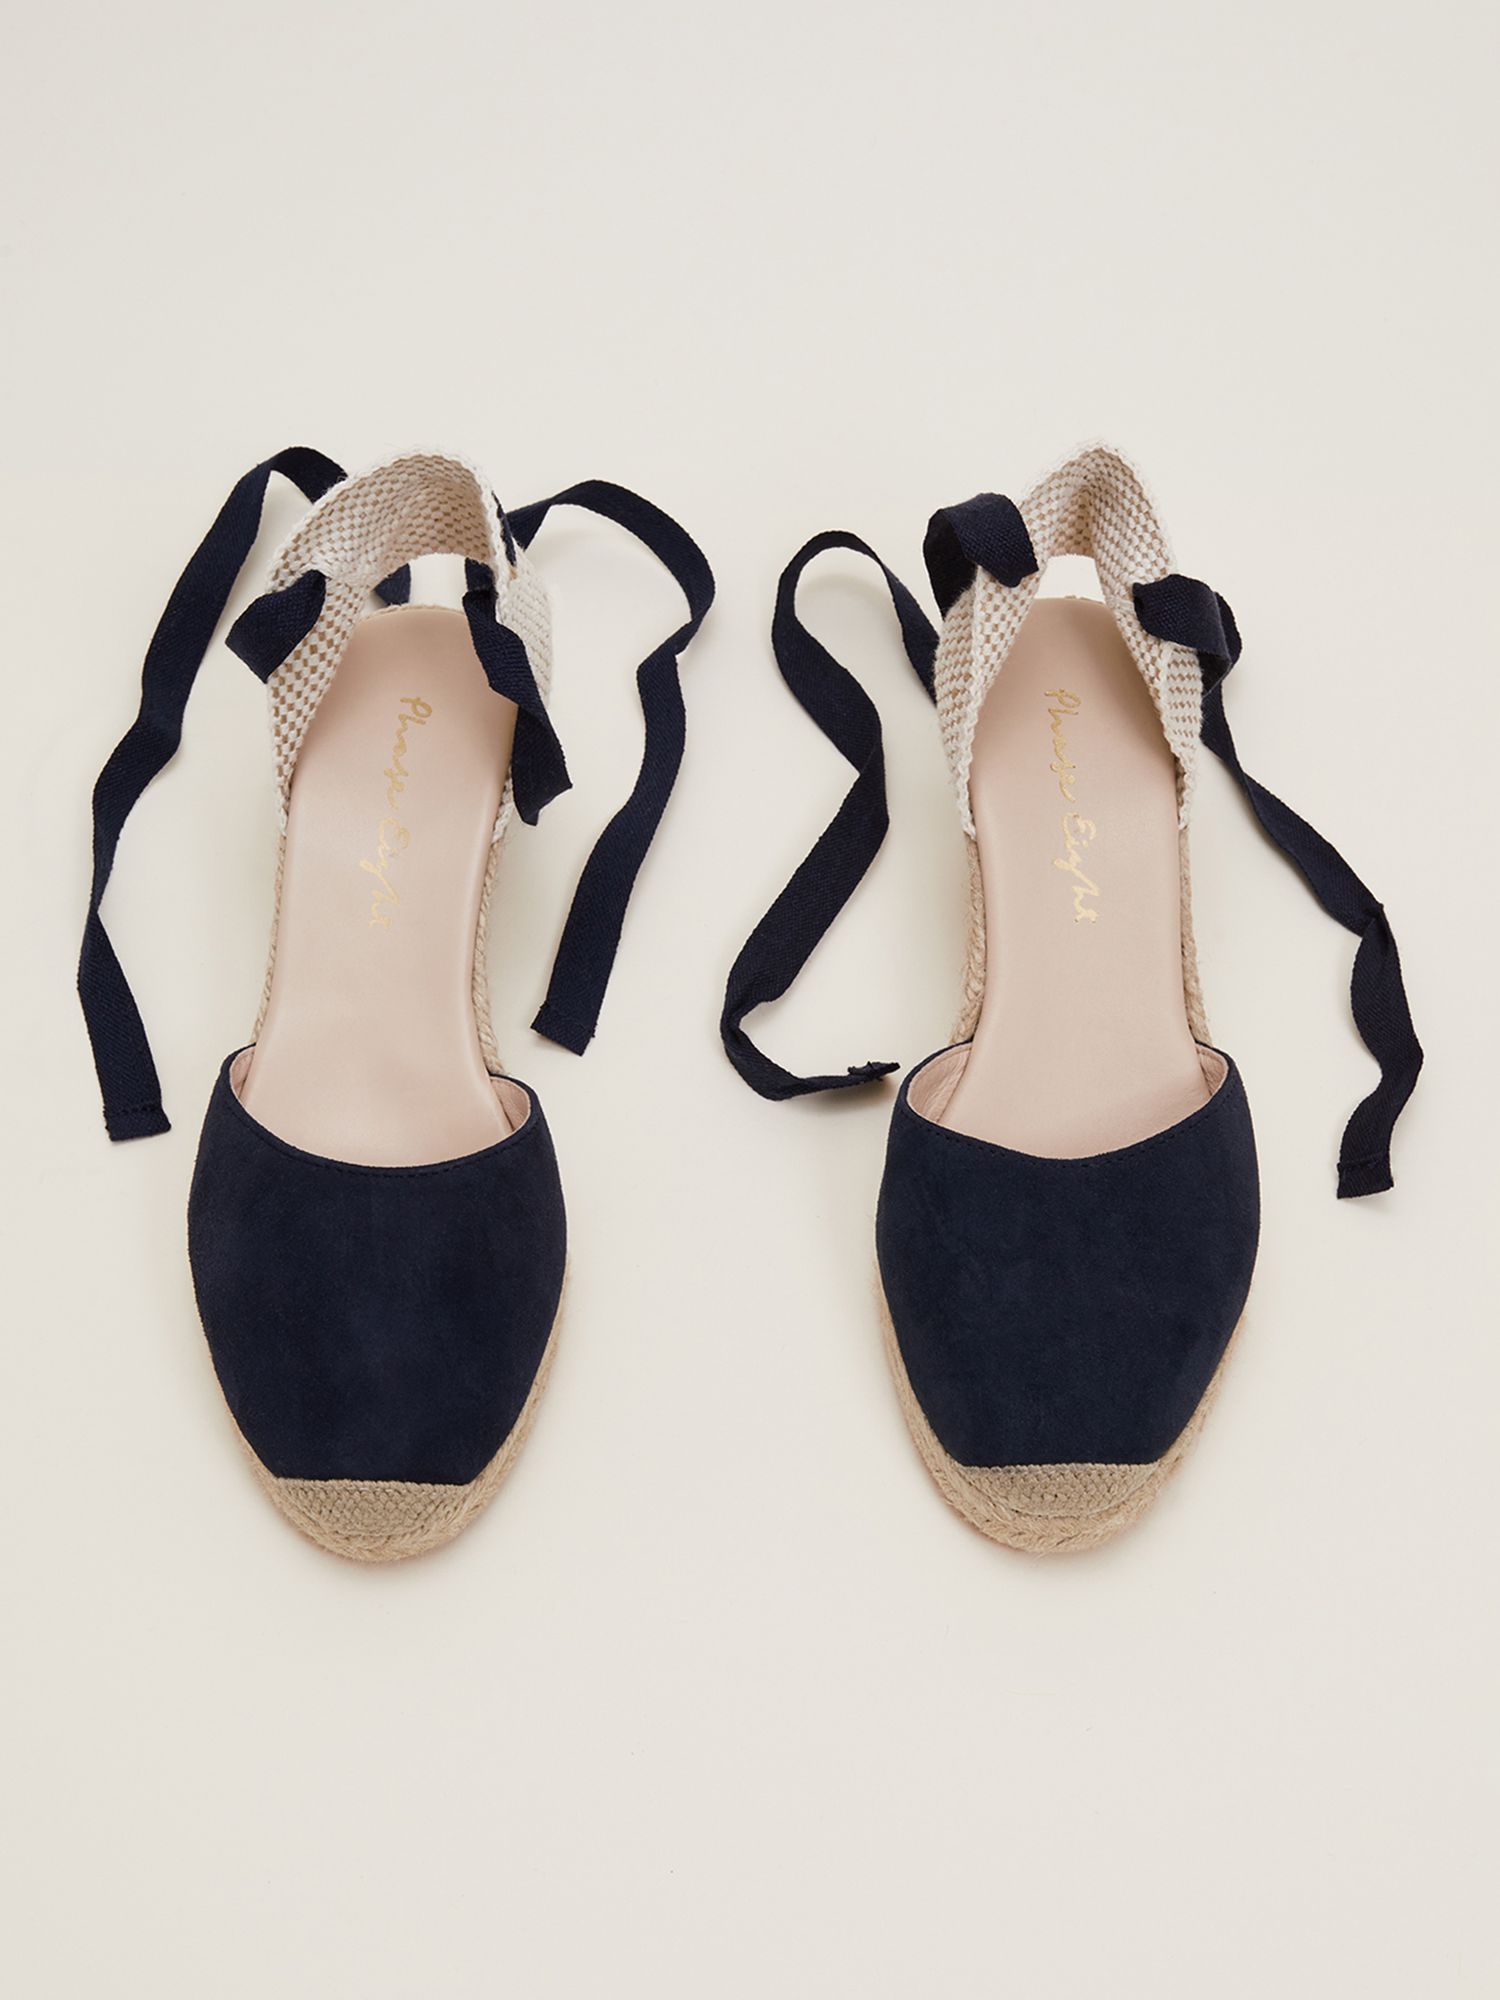 Phase Eight Suede Ankle Tie Espadrilles Navy at John Lewis Partners